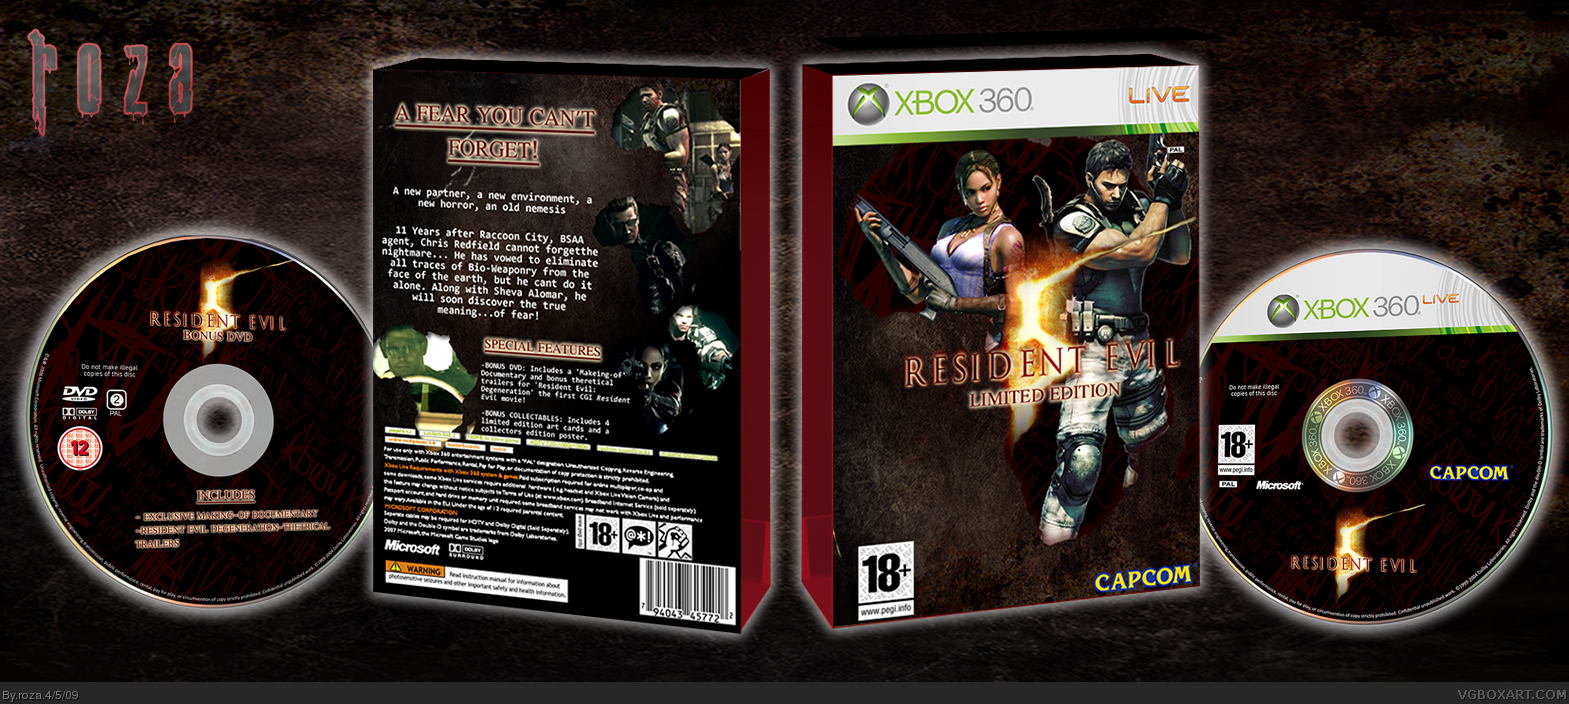 Resident Evil 5: Limited Edition box cover